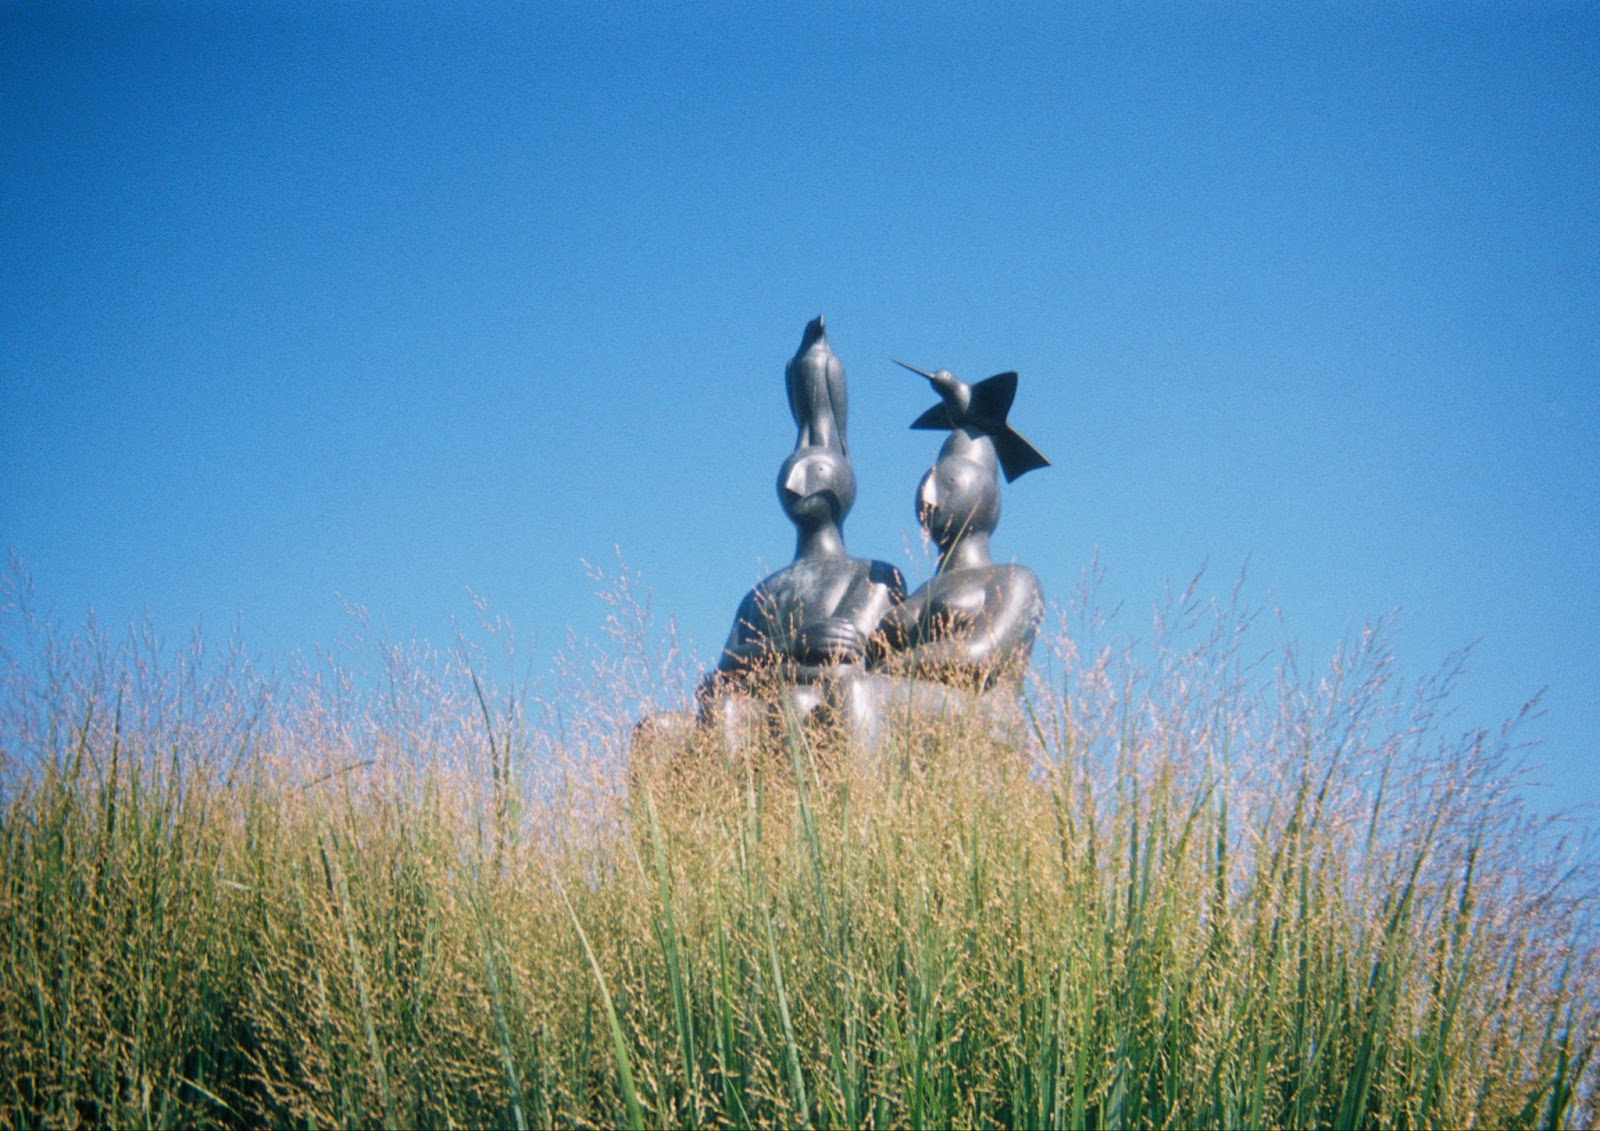 Image: Distance shot of Serenity, 2005. Green grass in the foreground partially covers a sculpture of two figures against a blue, cloudless sky. Photo by the author.